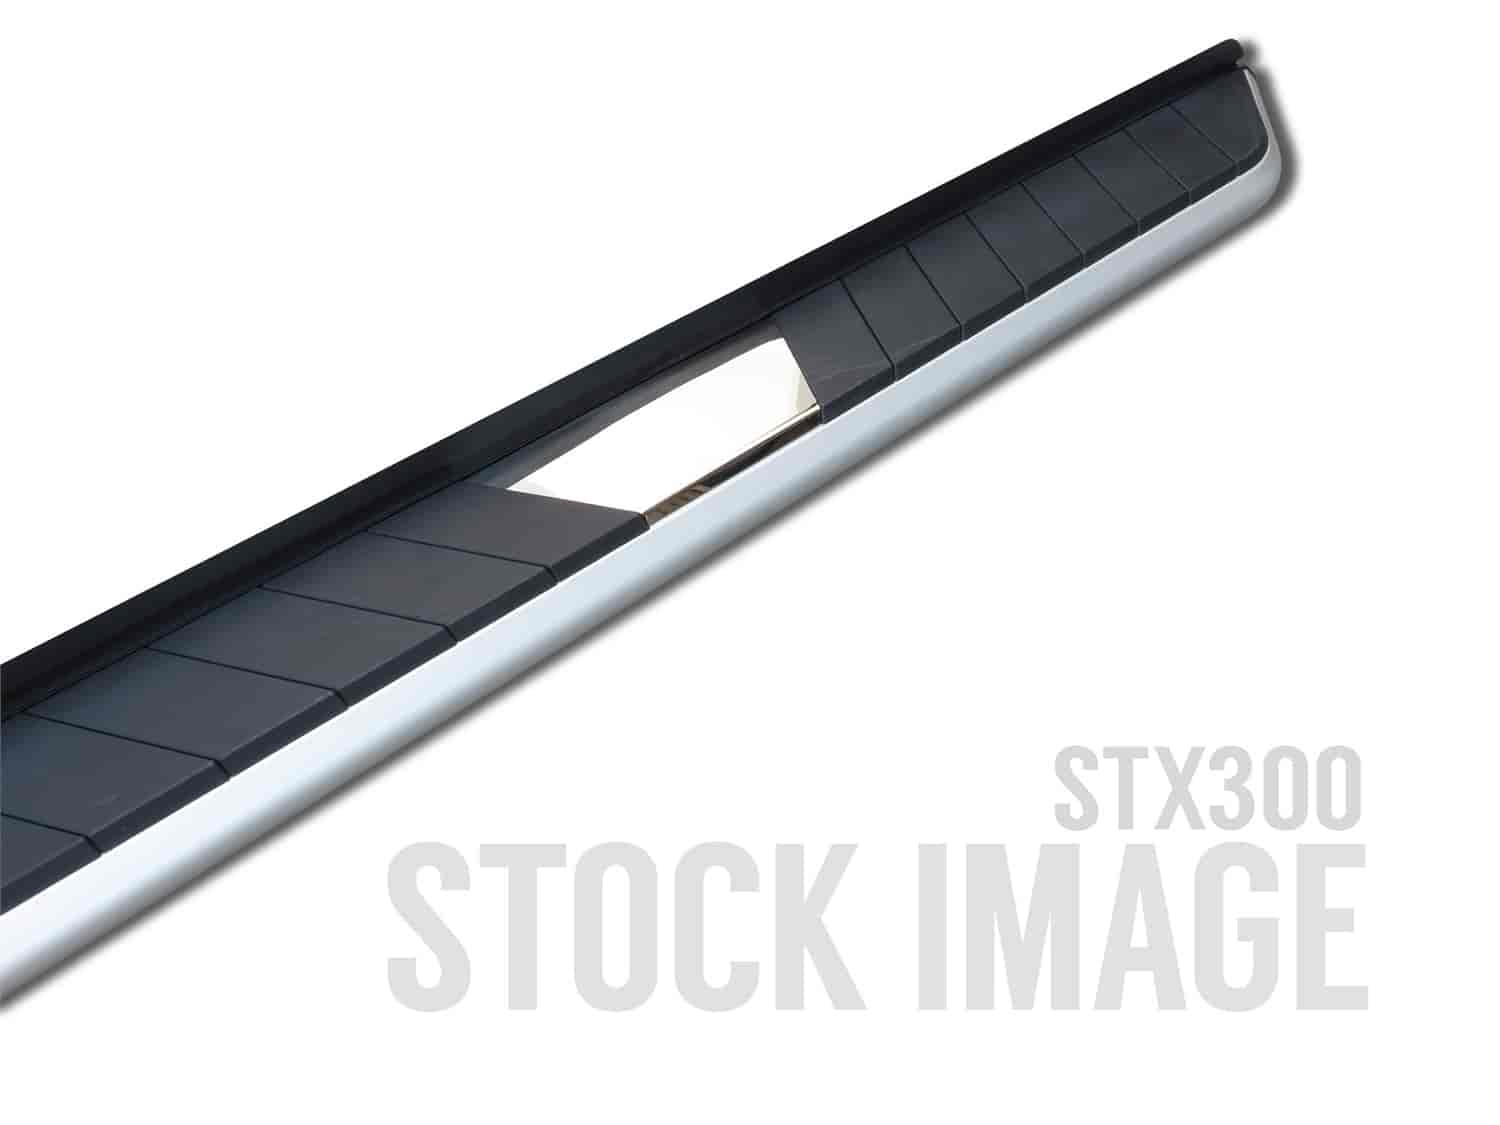 STX 300 Running Boards are designed with advanced